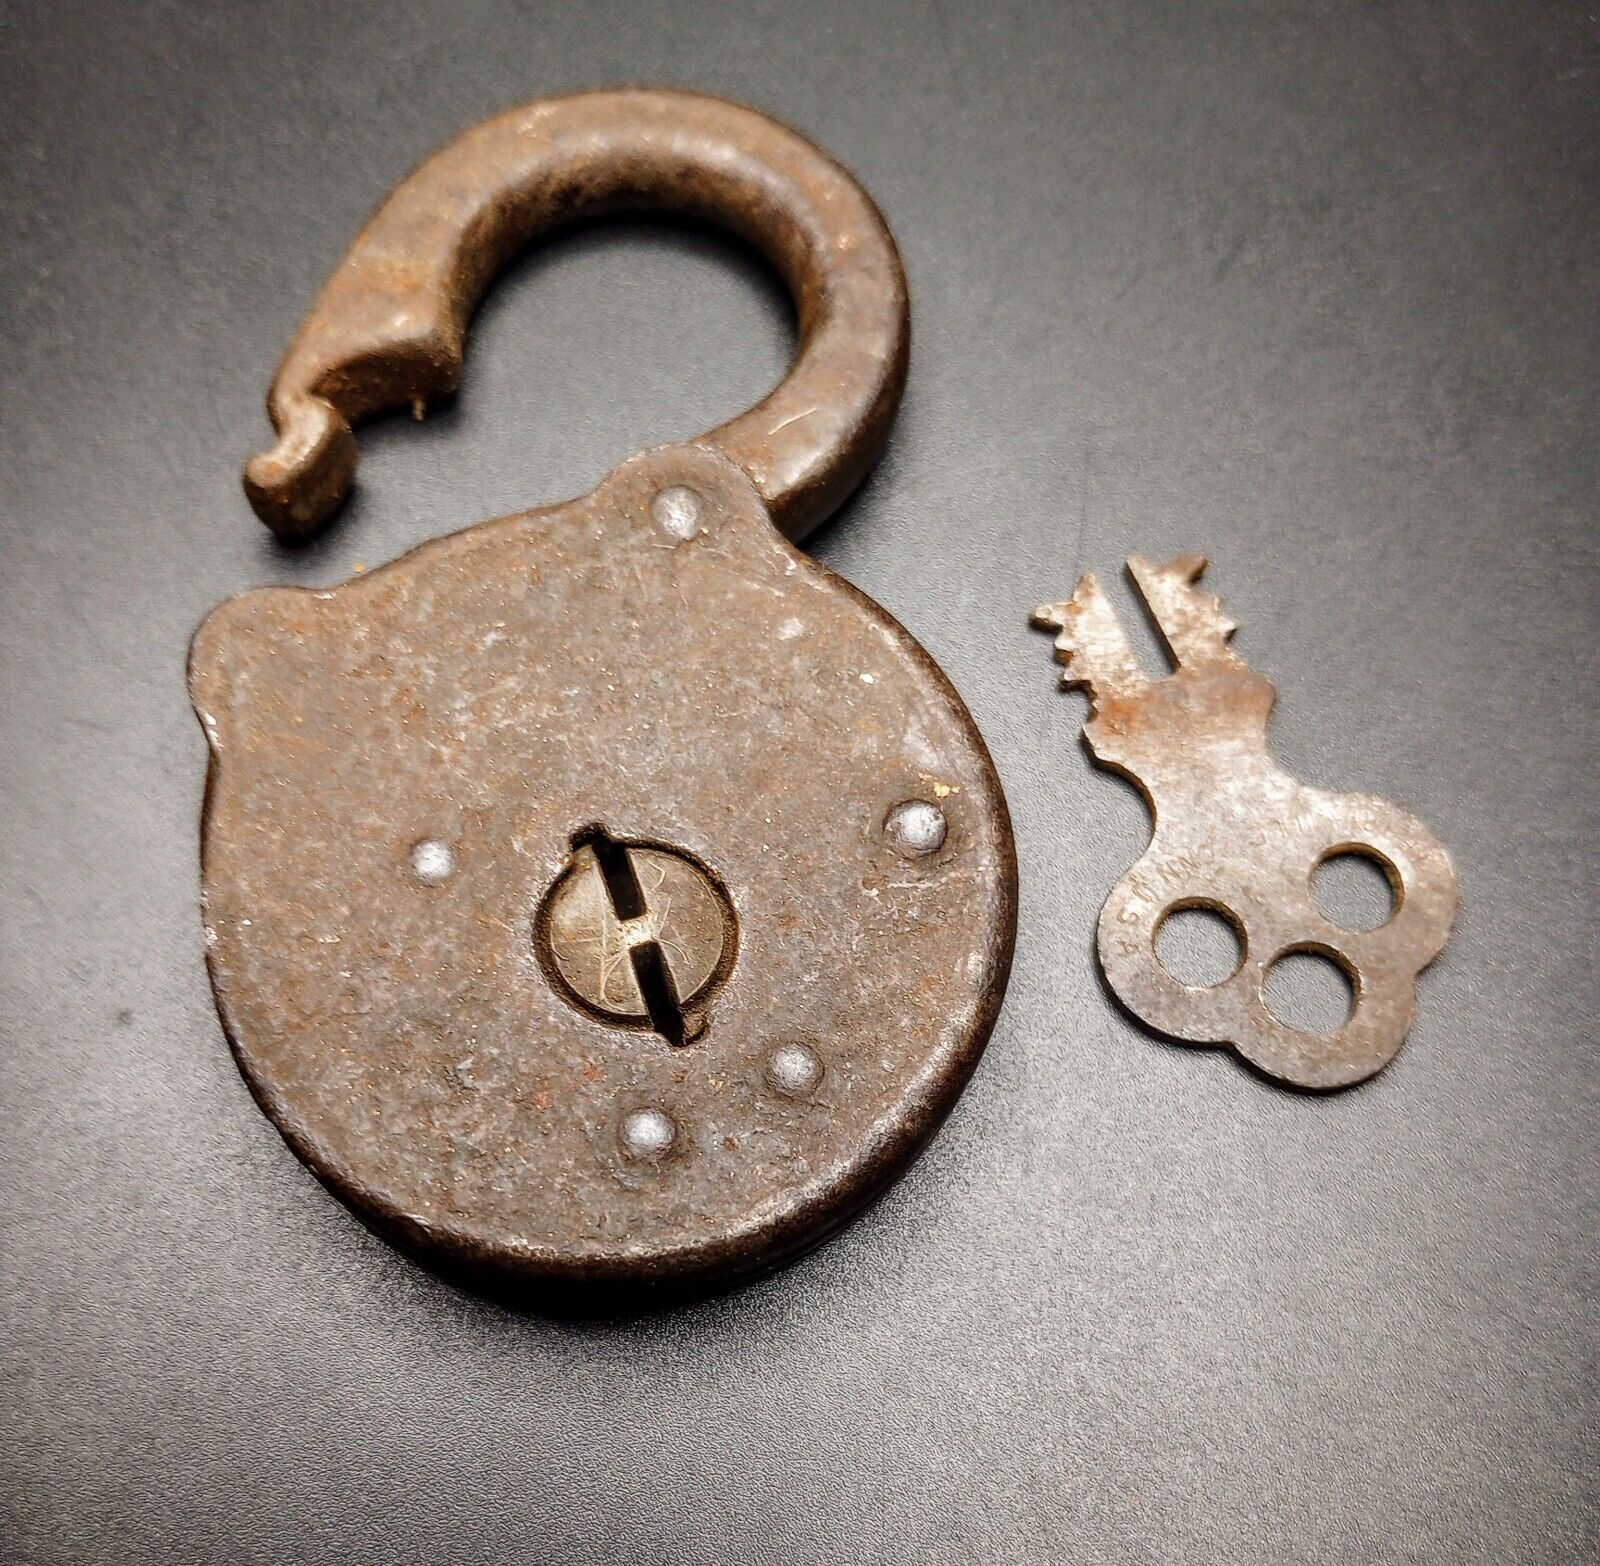 Antique Eagle Lock Co. Padlock With Key Works Smoothly